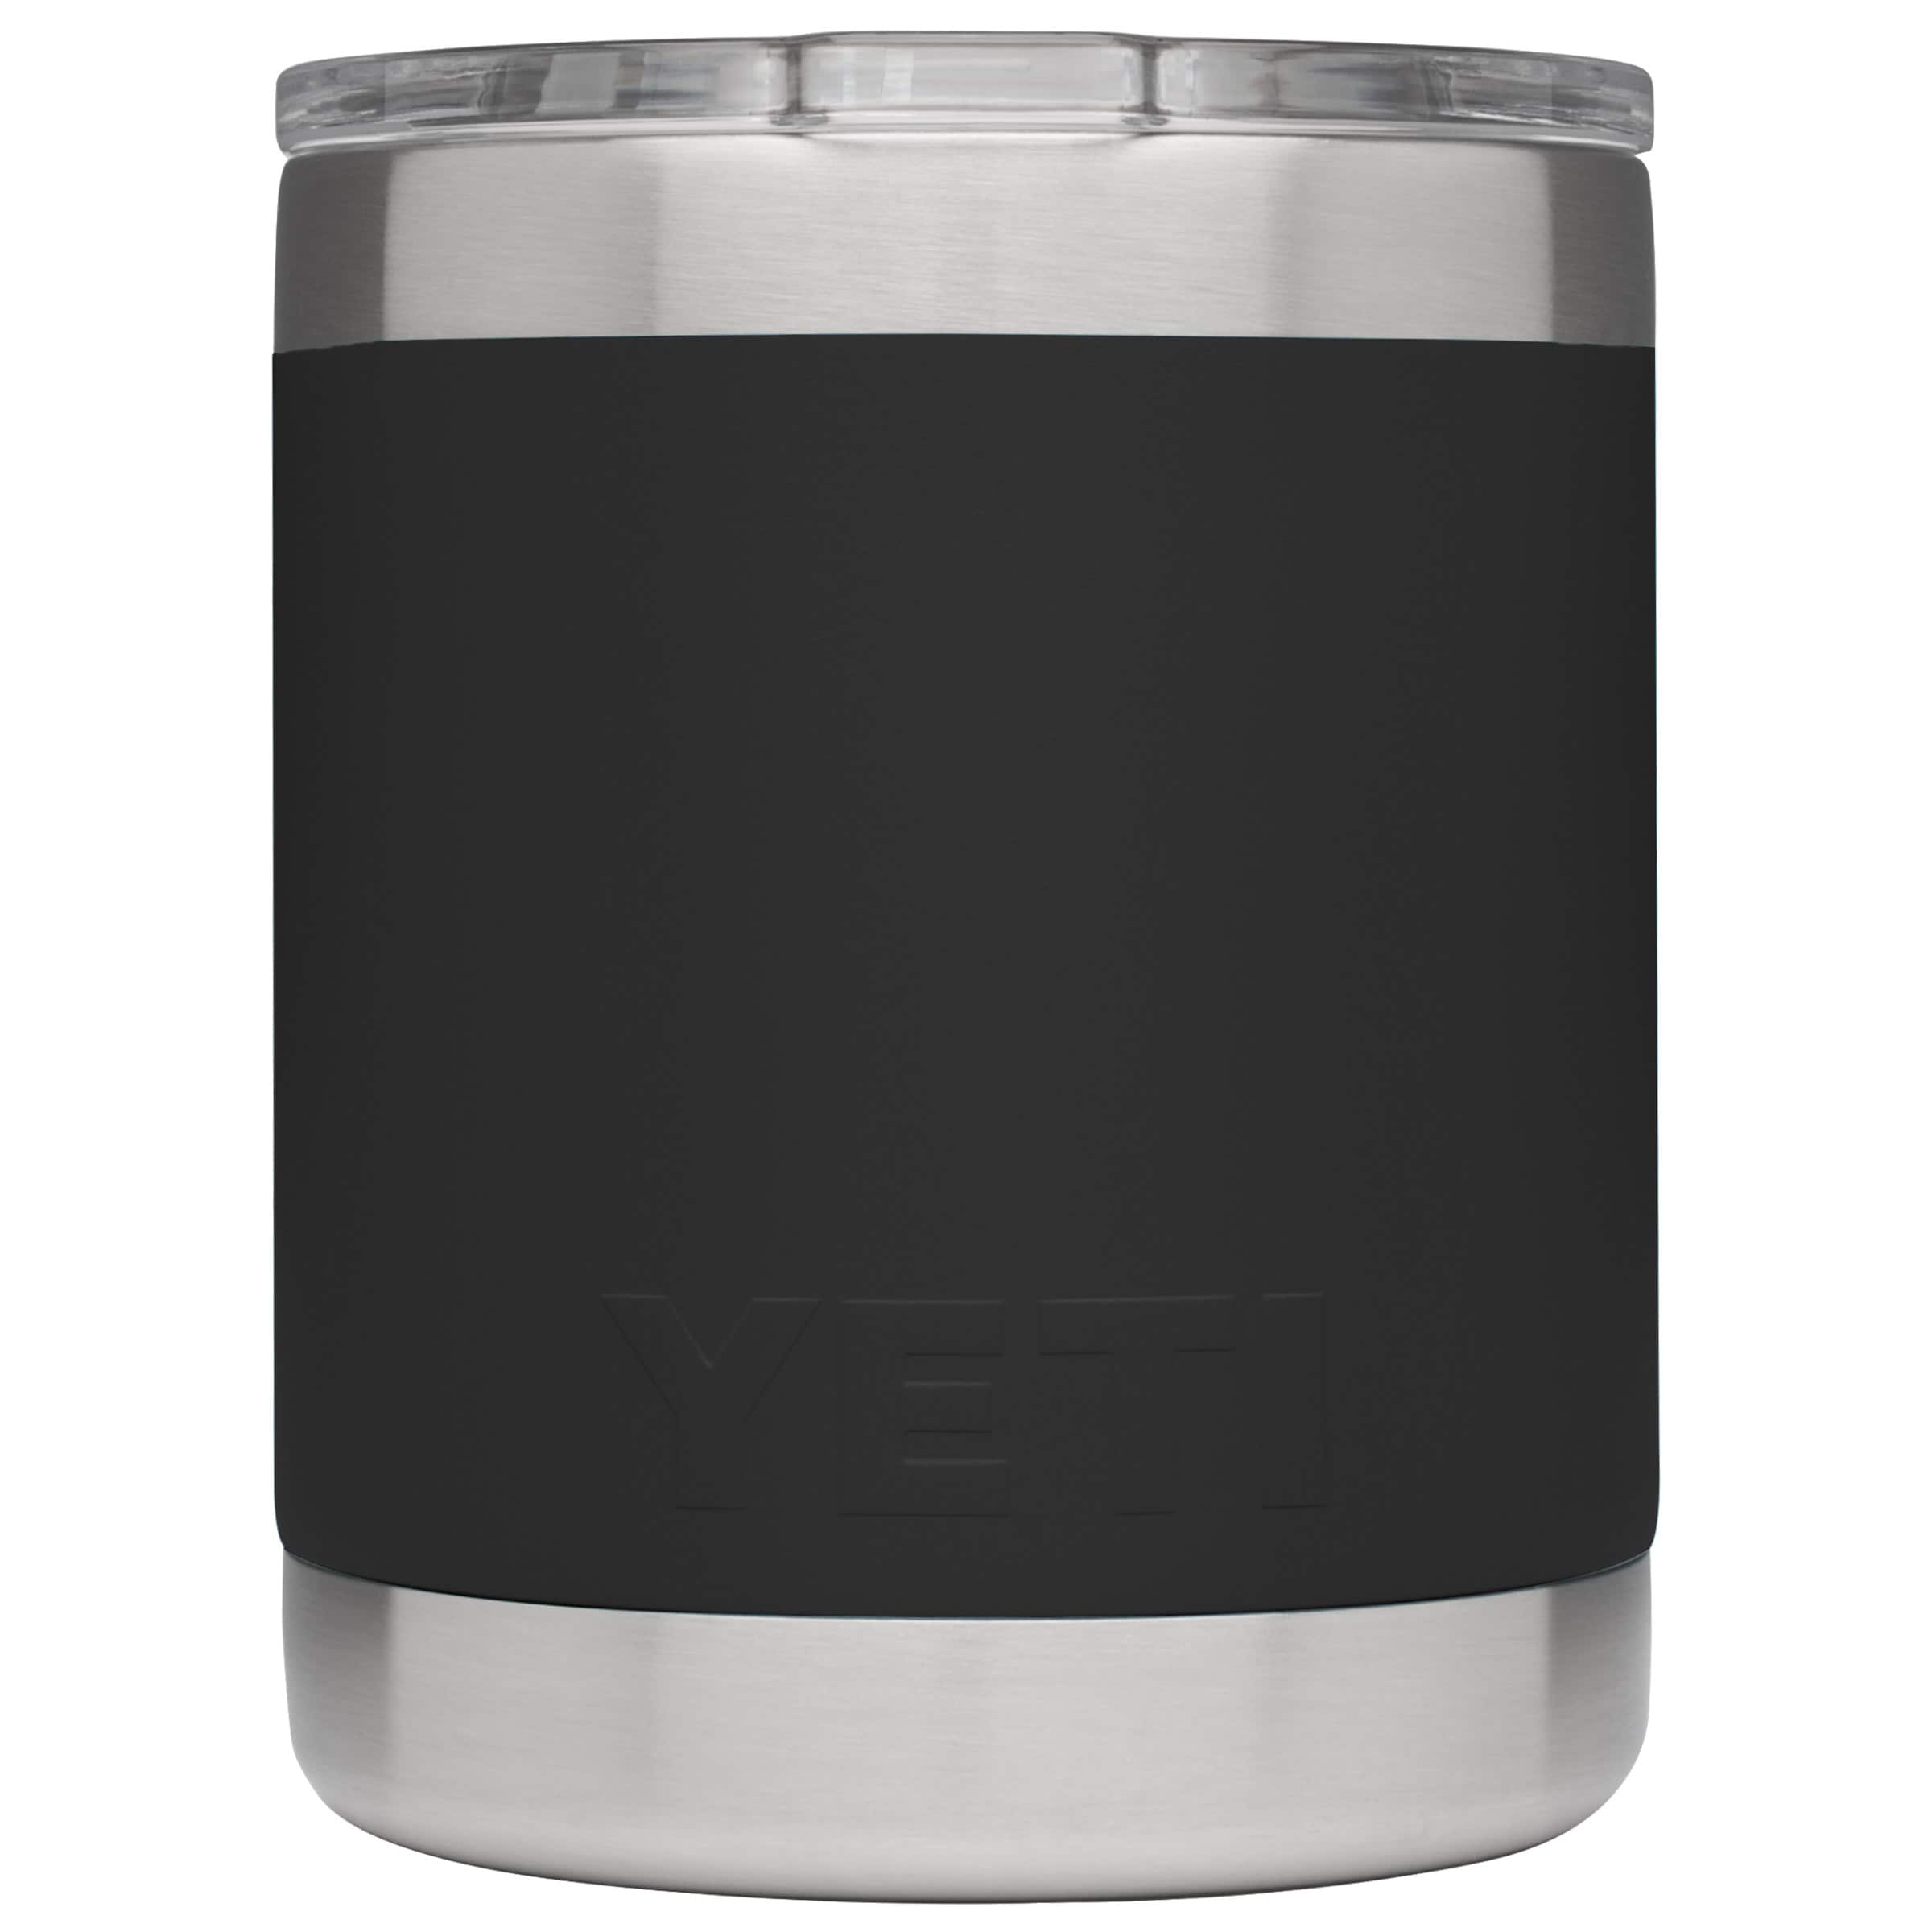 YETI Rambler 10 oz Tumbler, Stainless Steel, Vacuum Insulated  with MagSlider Lid, Black: Tumblers & Water Glasses